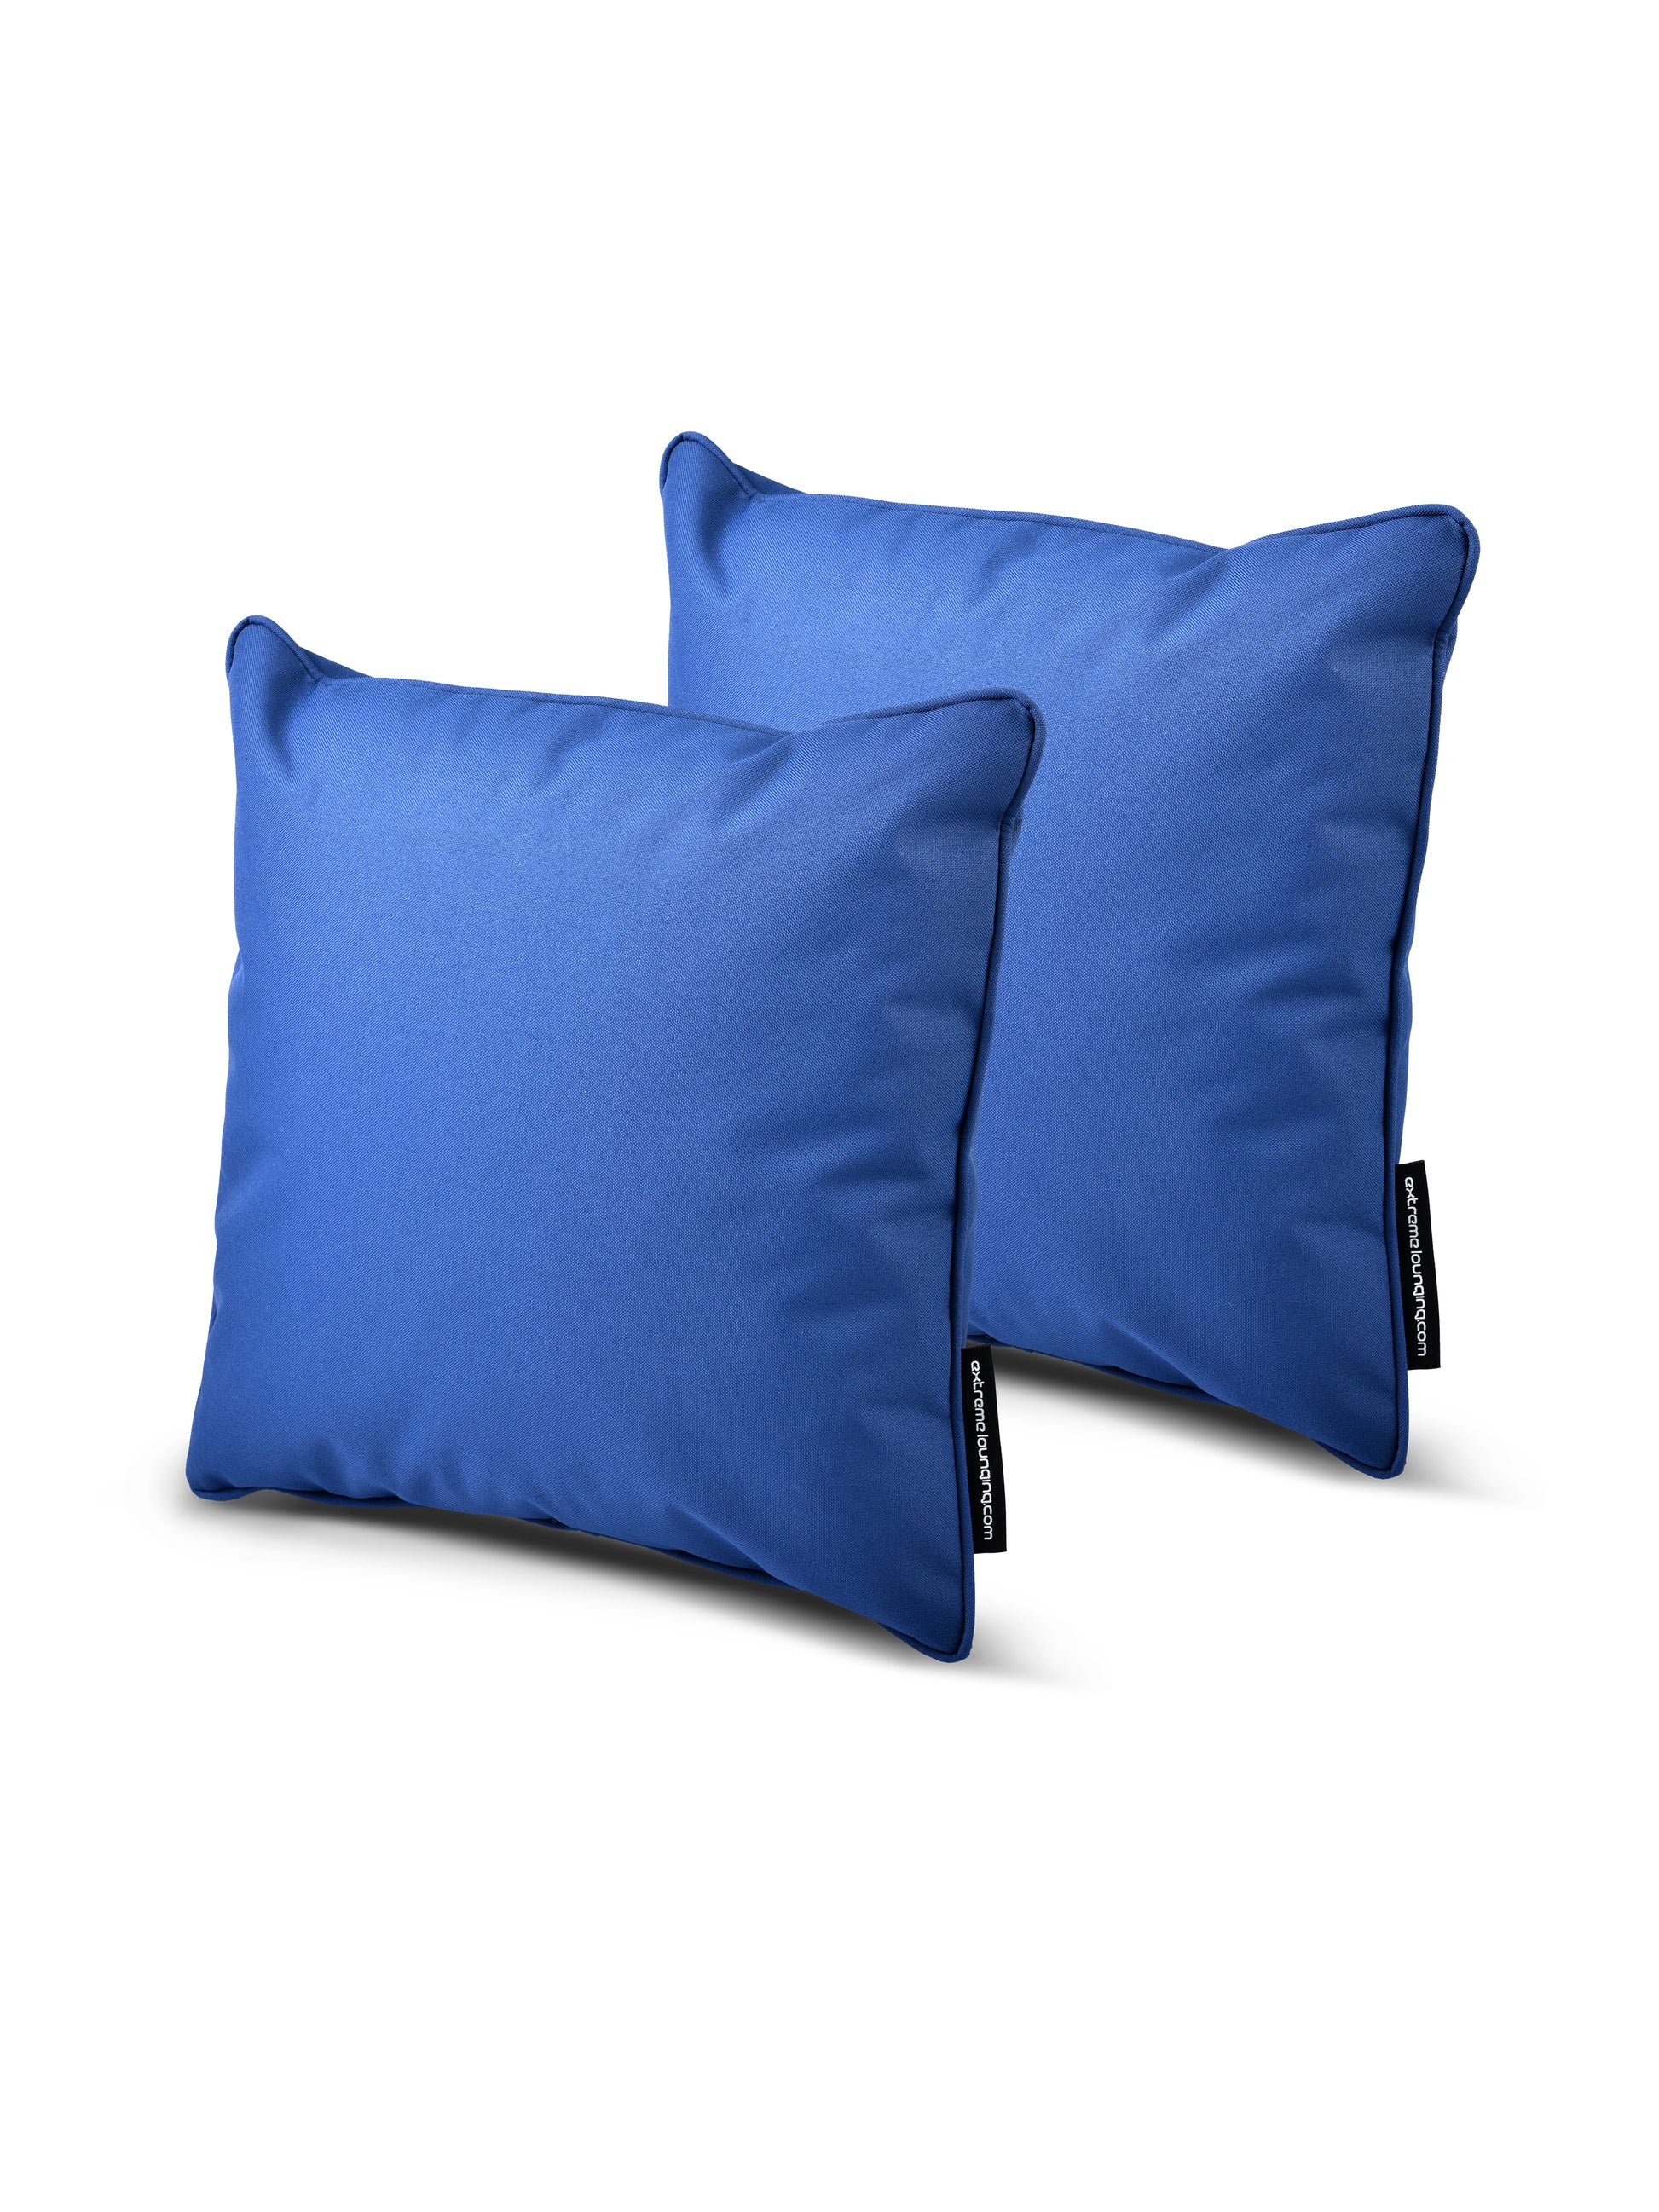 Two blue rectangular pillows with a smooth texture are shown in the image. Both B Cushion Twin Pack Brights Collection cushions from Brisks, made of breathable polyester, have tags on their sides, possibly indicating the brand or care instructions. The splash-proof B Cushion Twin Pack Brights Collection cushions are slightly overlapping, with one positioned just behind the other.